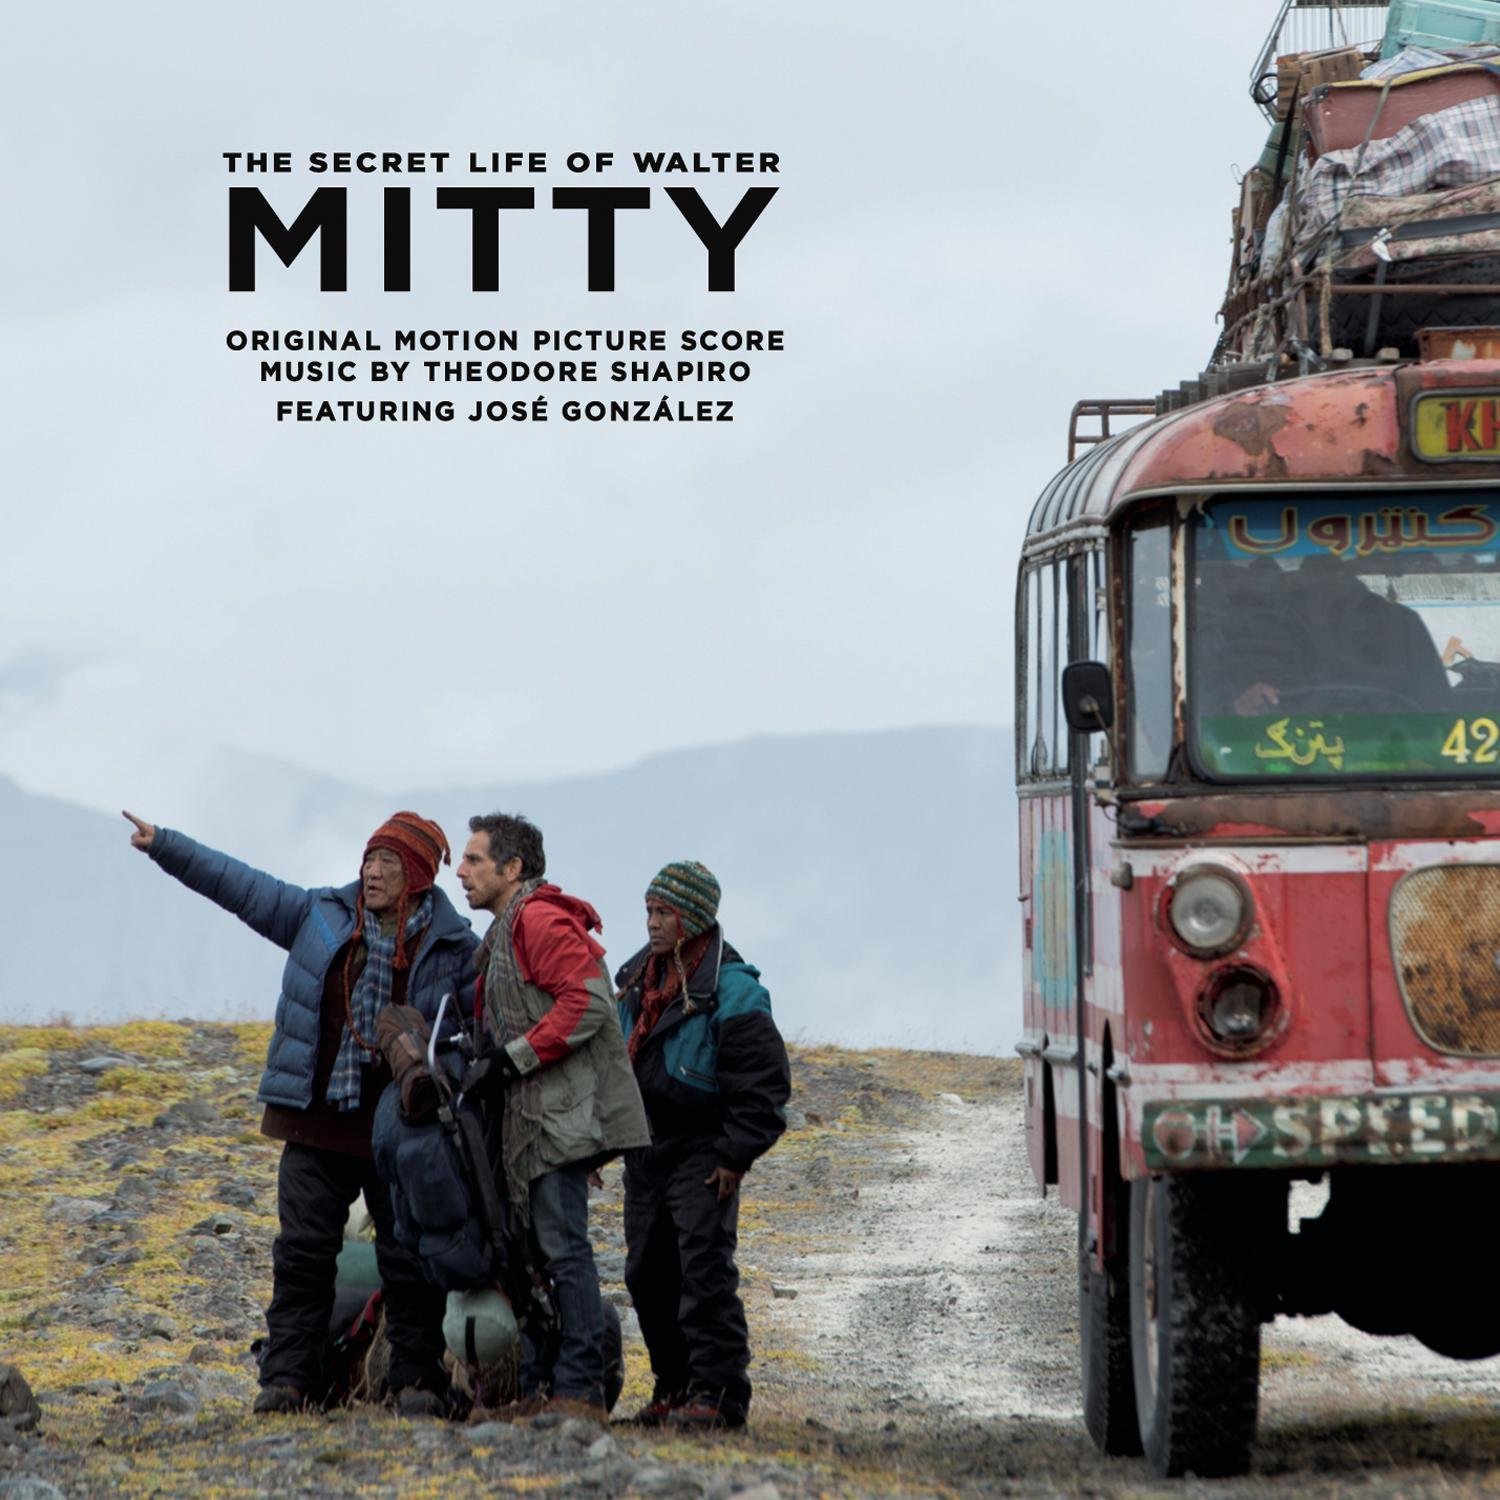 THE SECRET LIFE OF WALTER MITTY score album, Sony Classical CD, 2013.